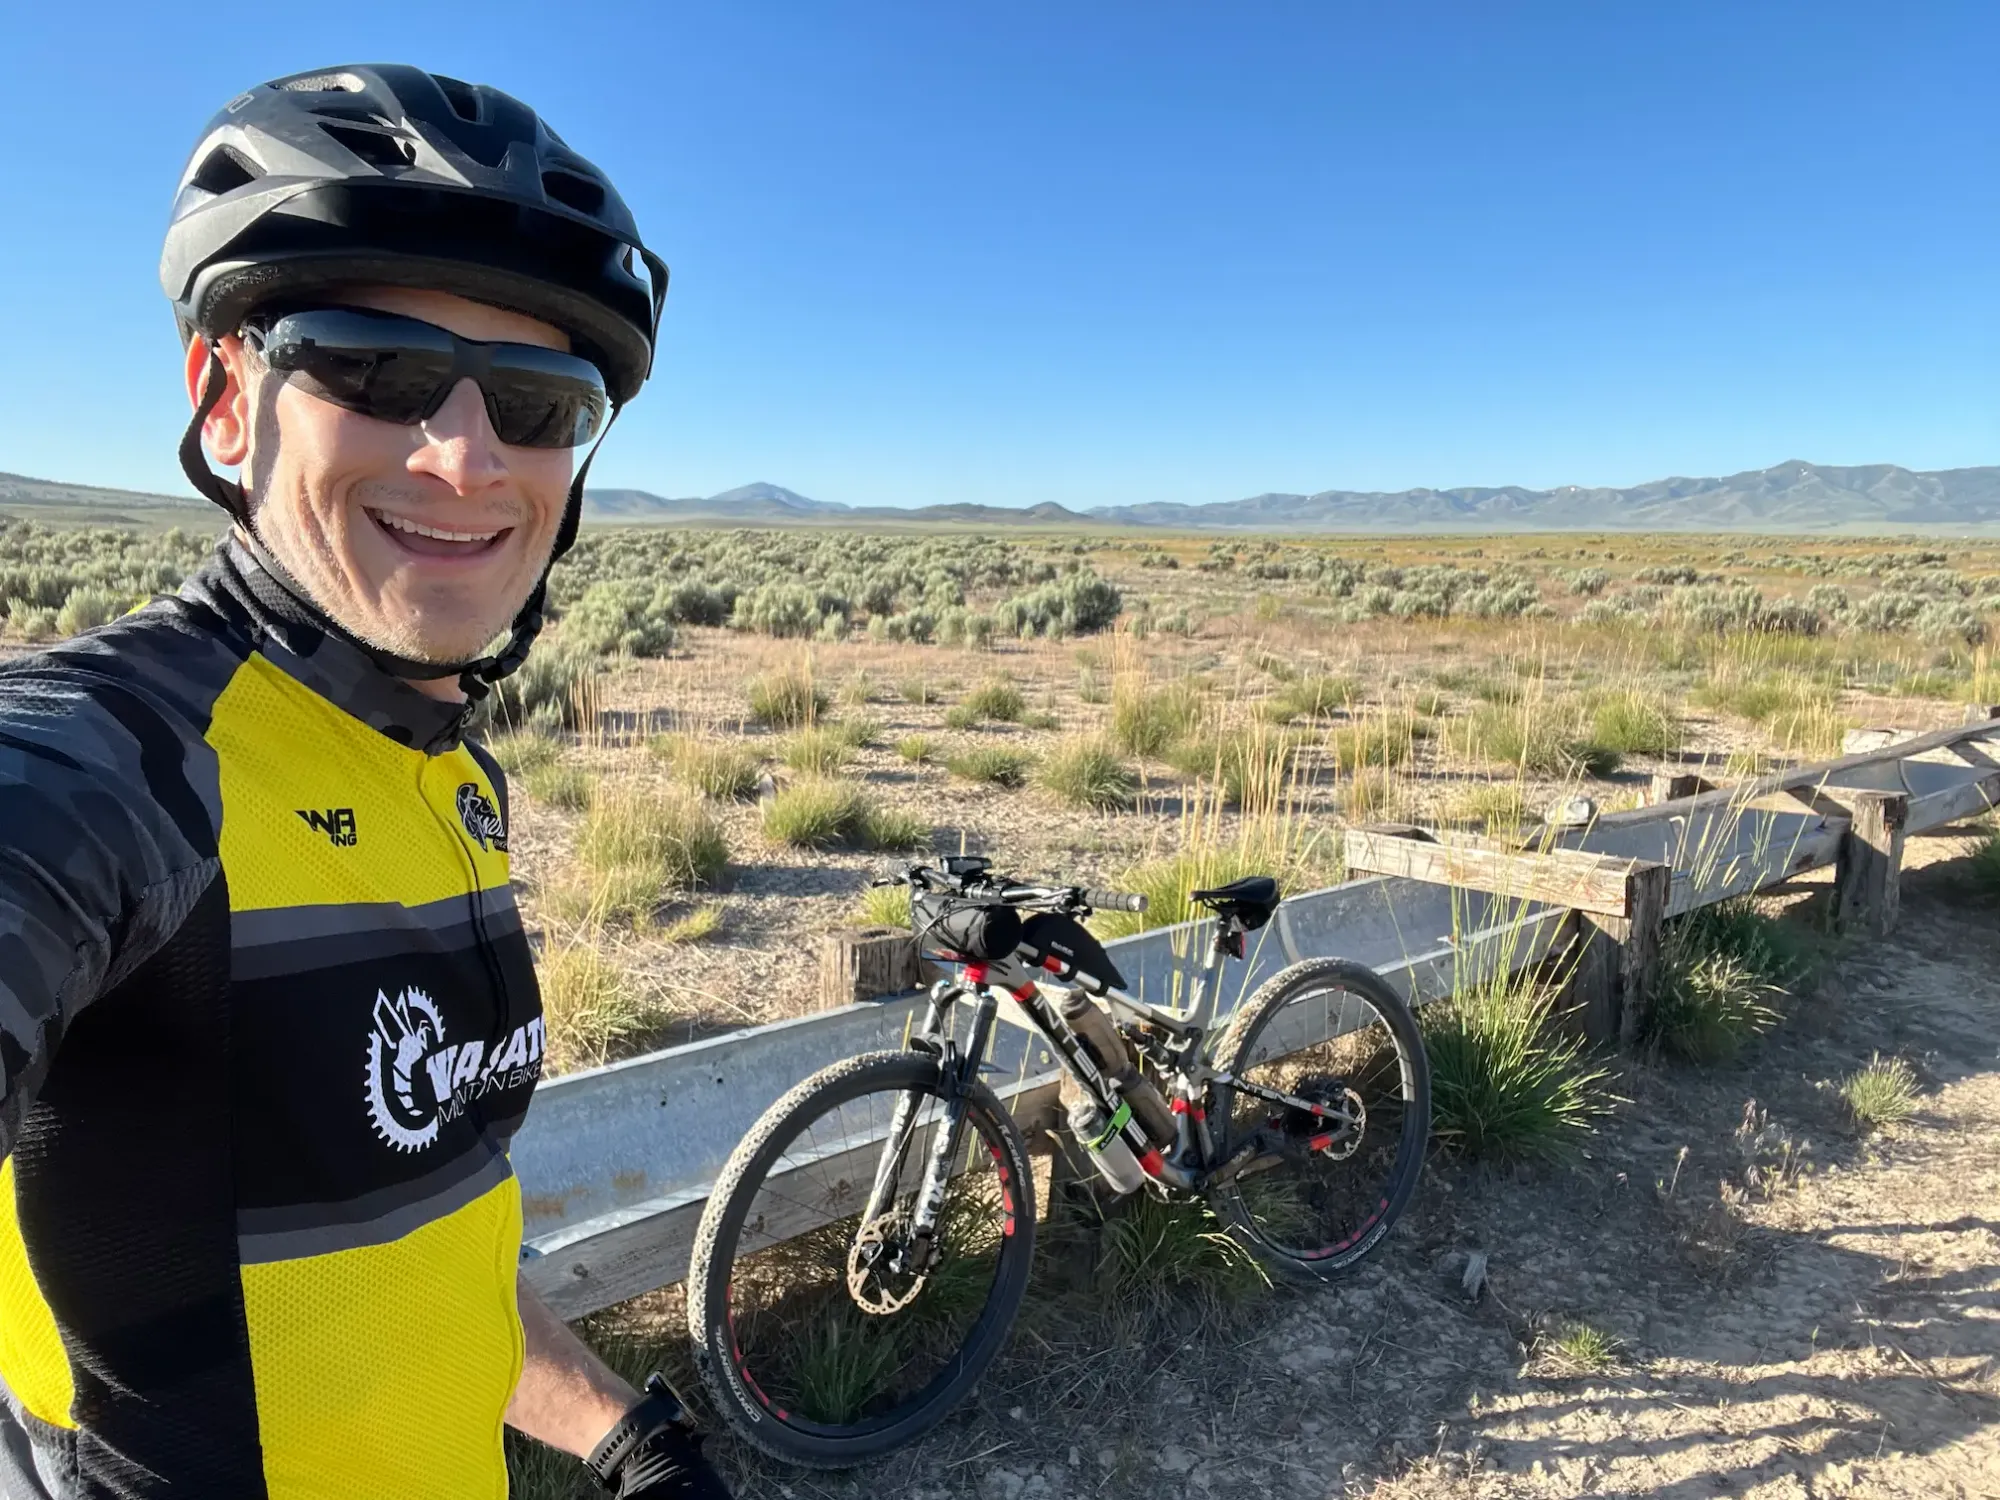 Keith is taking a selfie during a self-supported adventure ride through the west desert area of Utah Valley